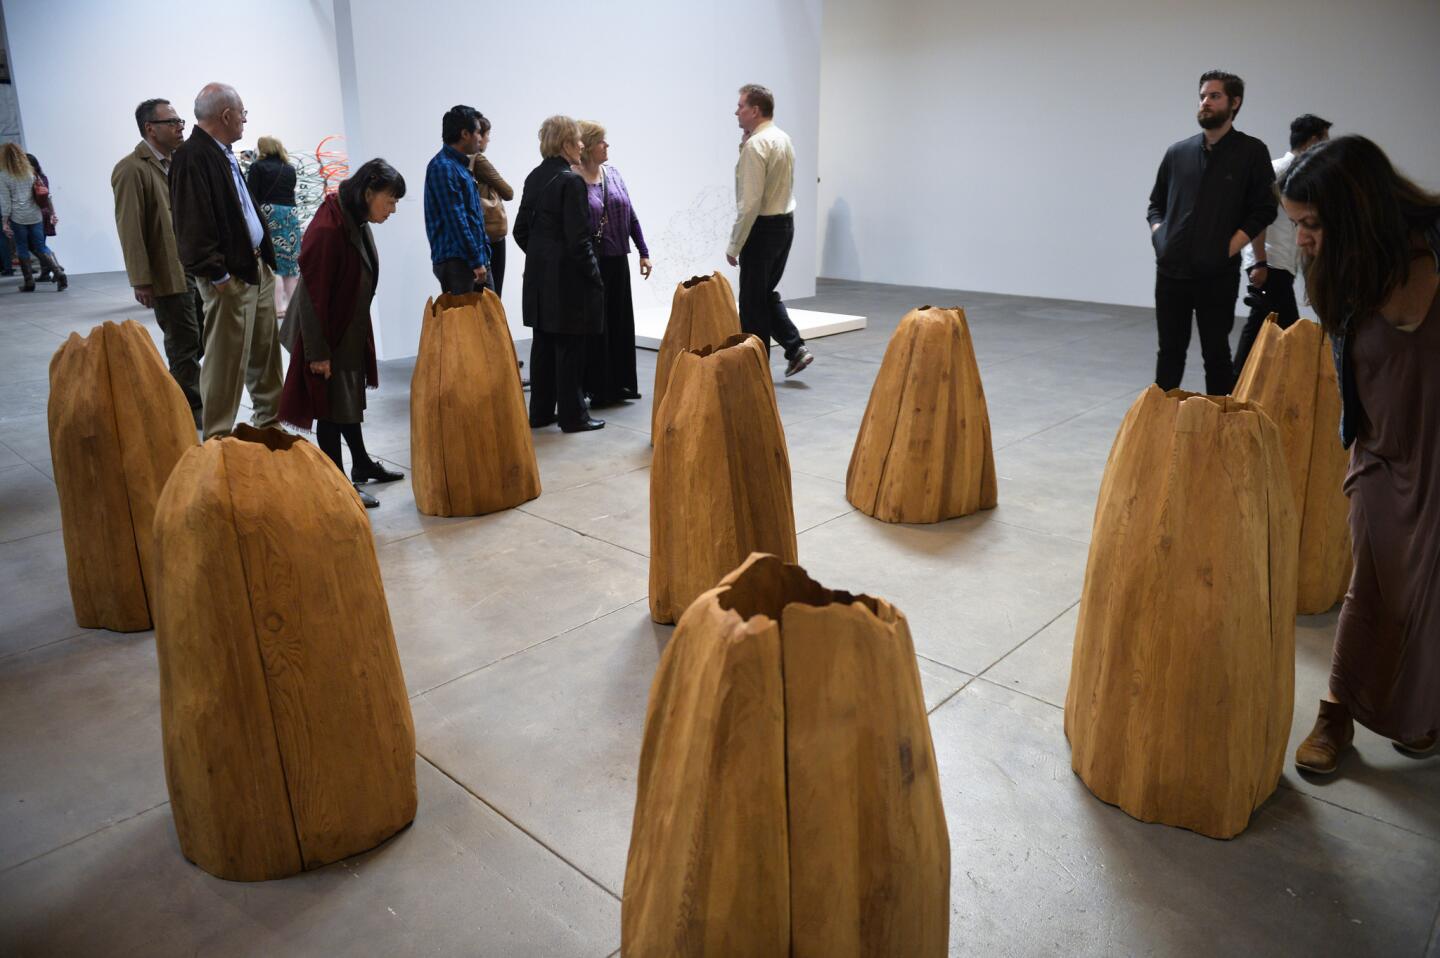 Artwork by Ursula von Rydingsvard on display in one of the multiple themed-galleries at the Hauser Wirth & Schimmel opening Sunday in the Arts District.